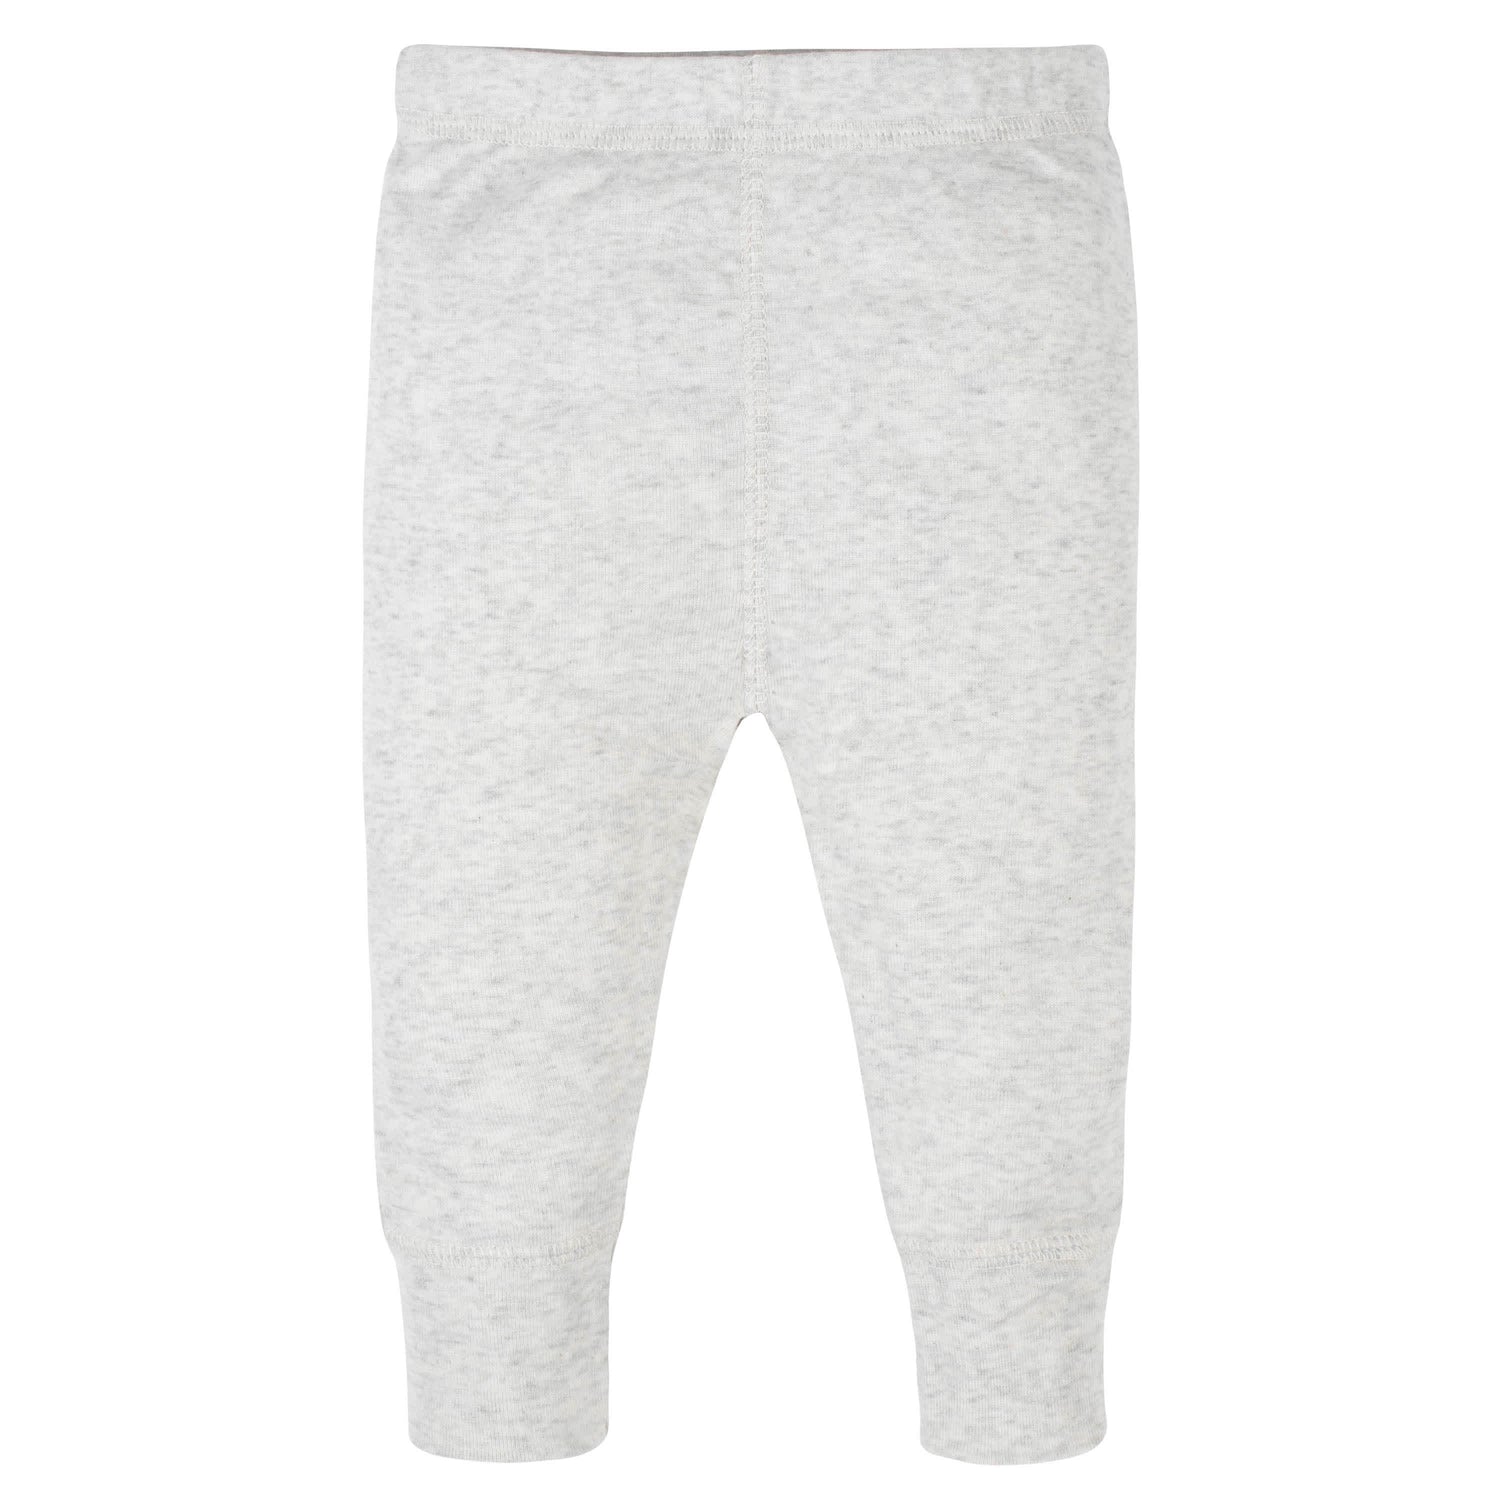 4-Pack Baby Neutral Gray Heather Pants – Gerber Childrenswear